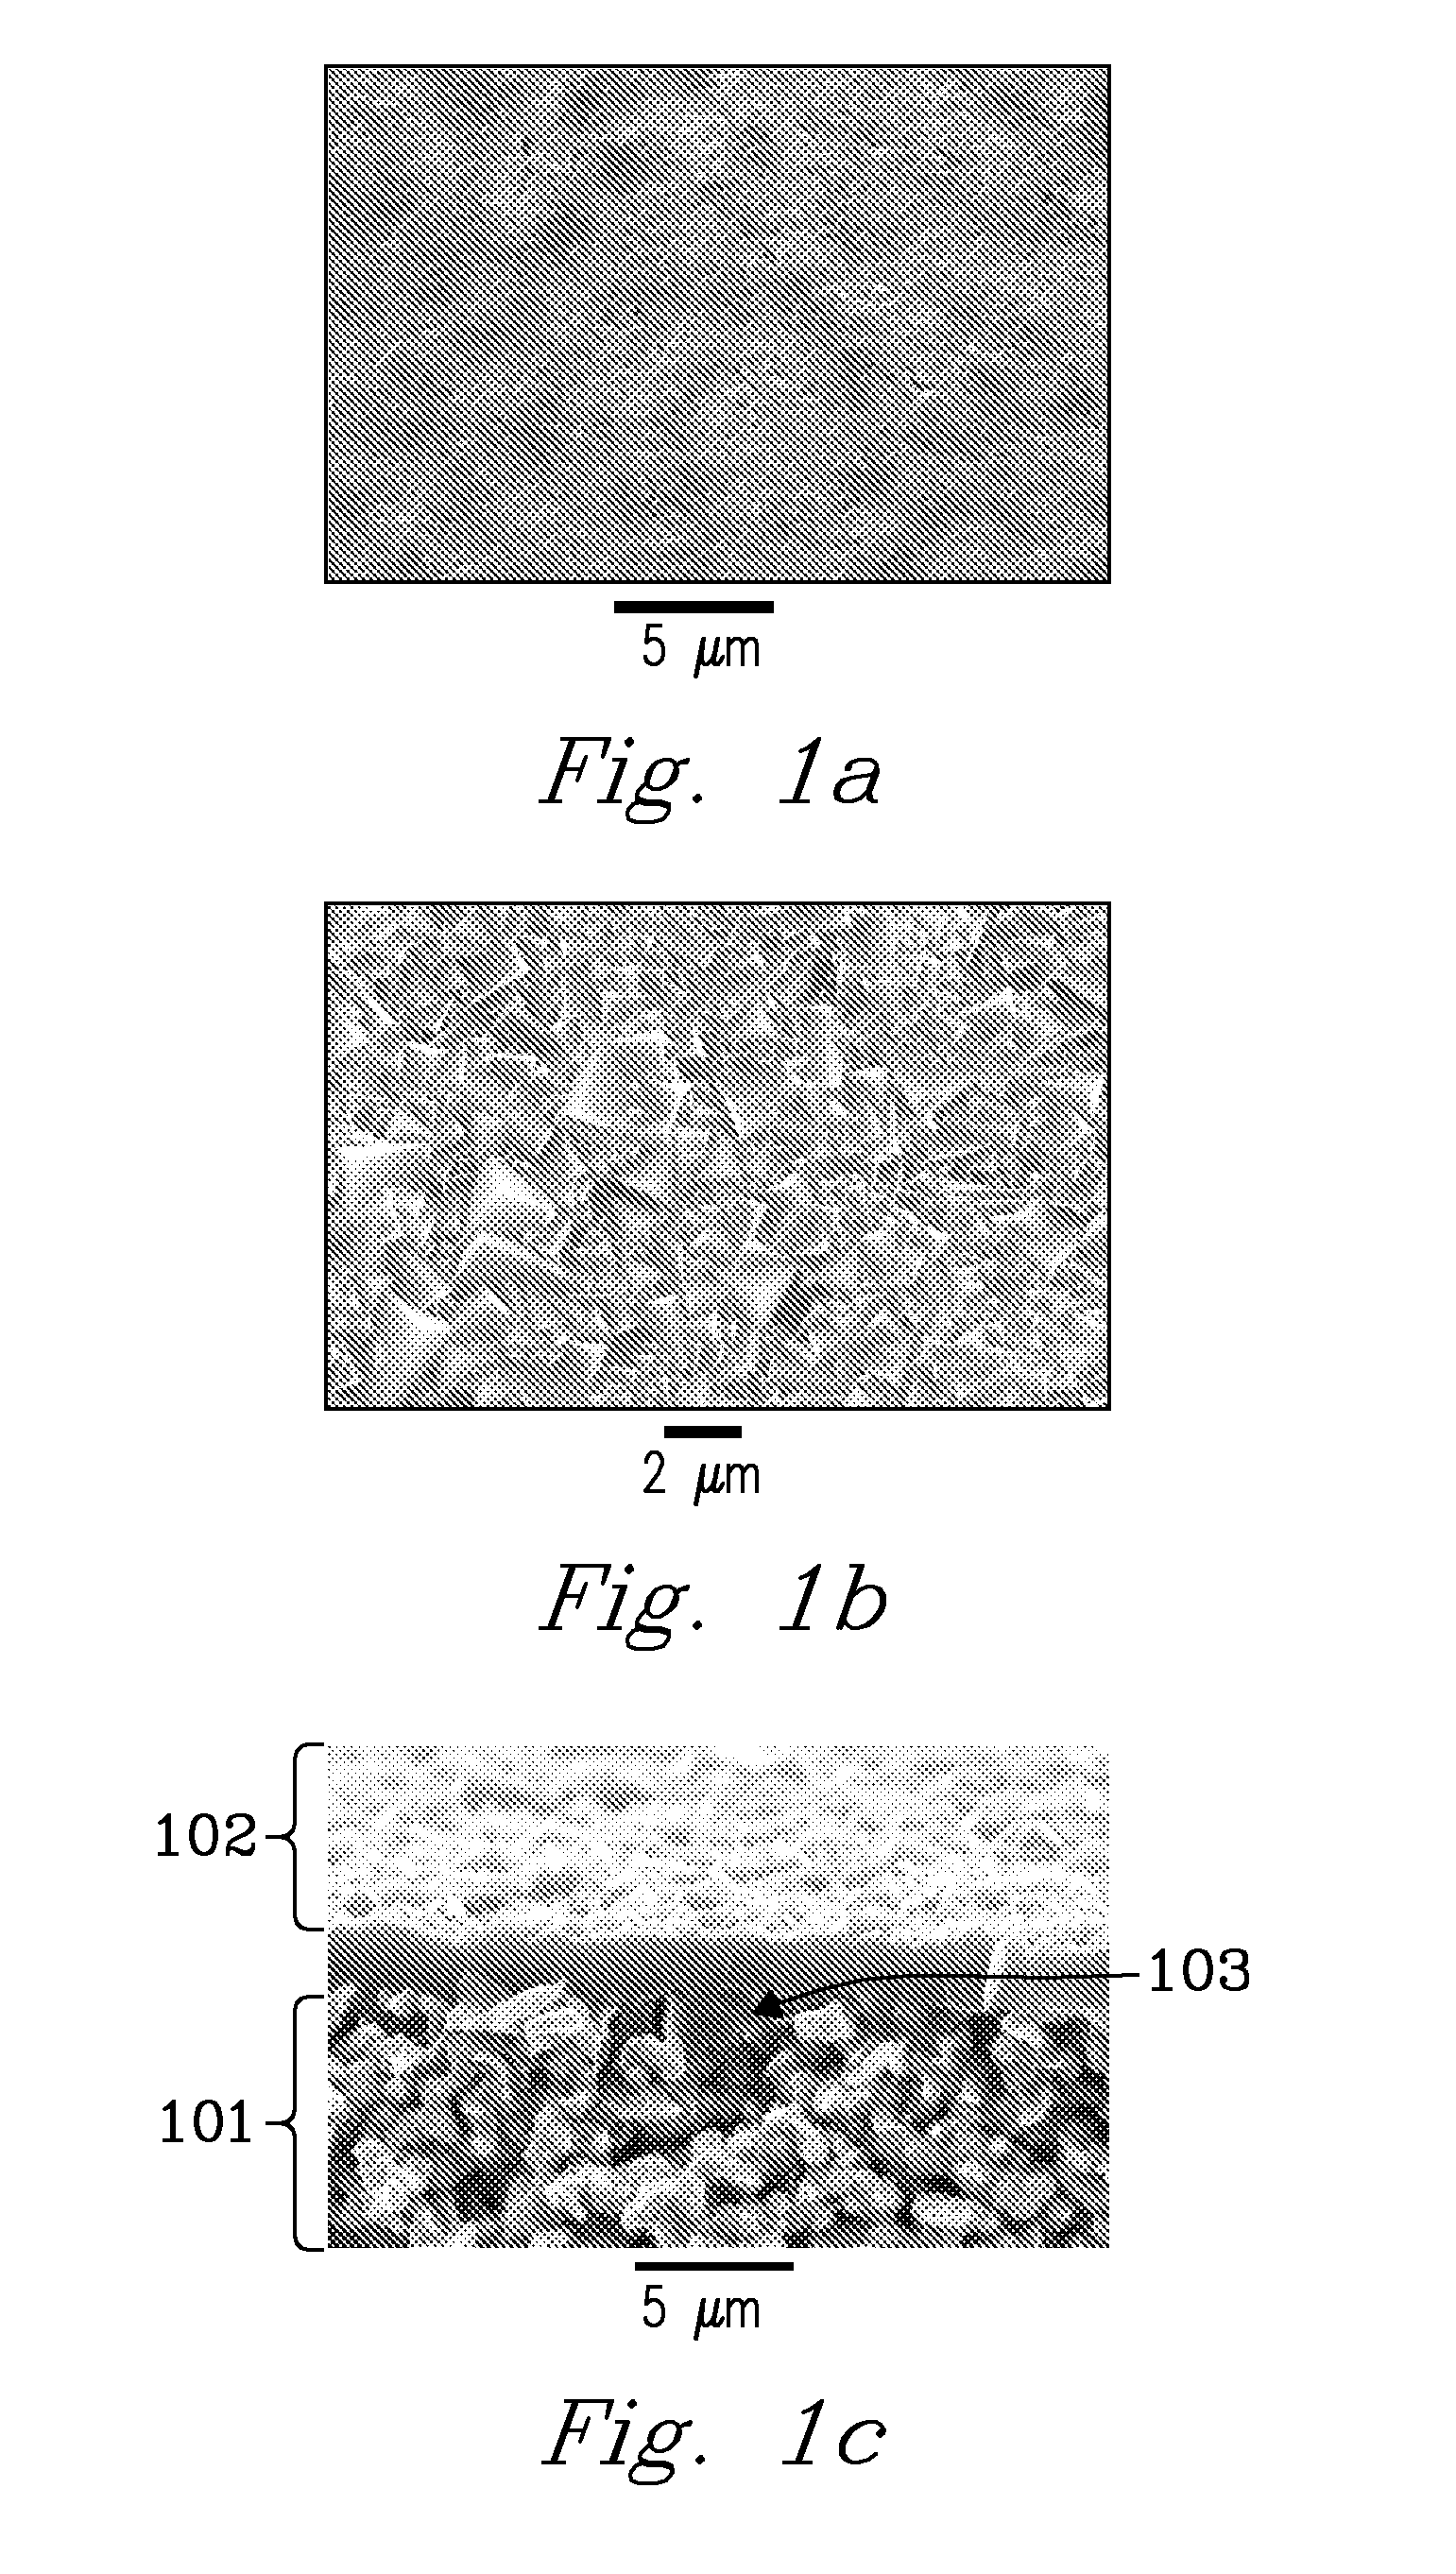 Zeolite Membranes for Separation of Mixtures Containing Water, Alcohols, or Organics